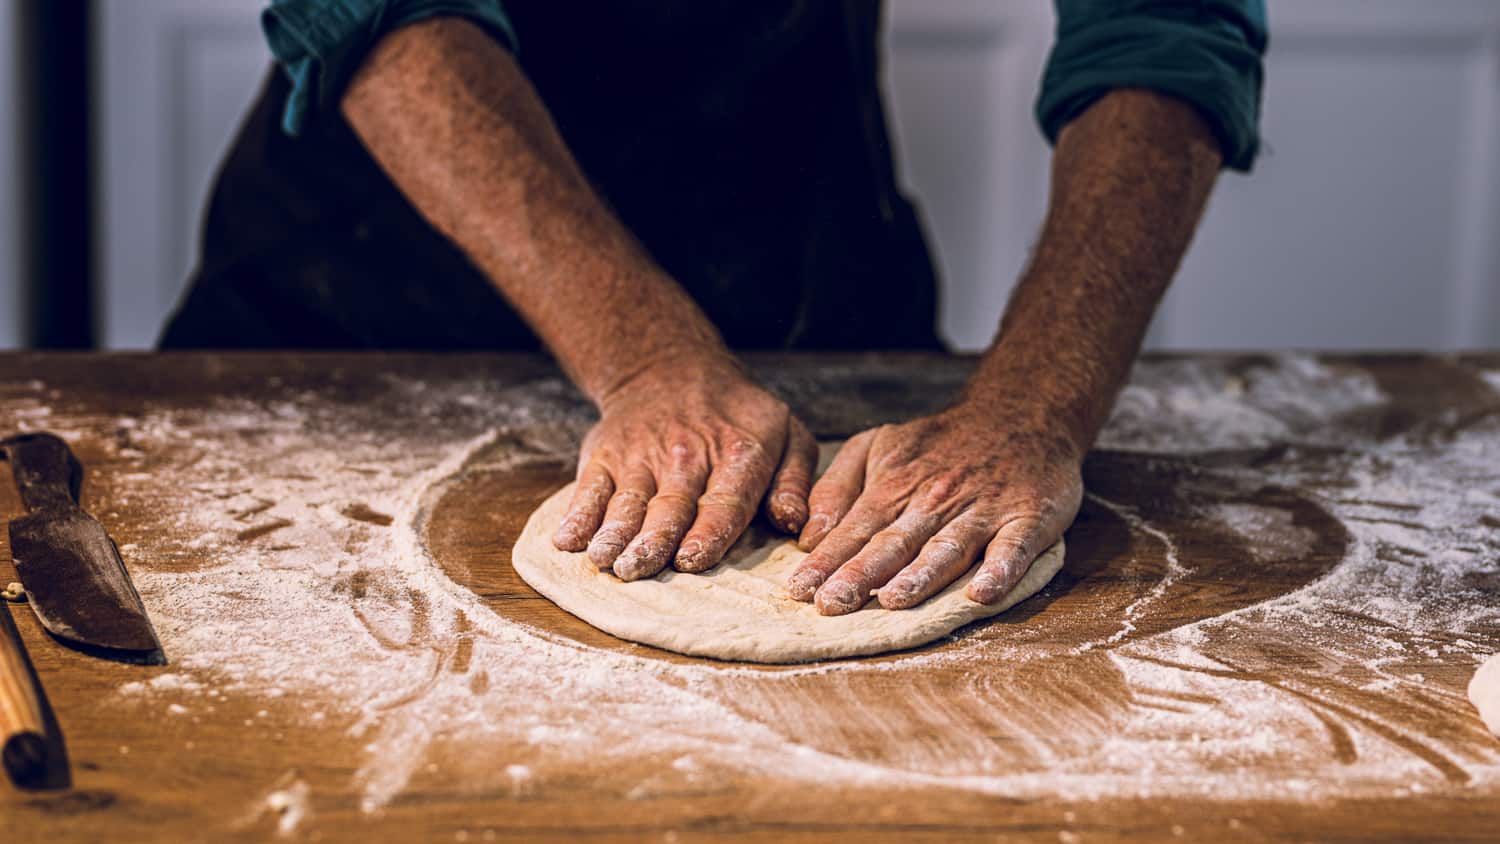 Close-up of chef's hands kneading pizza dough in kitchen.